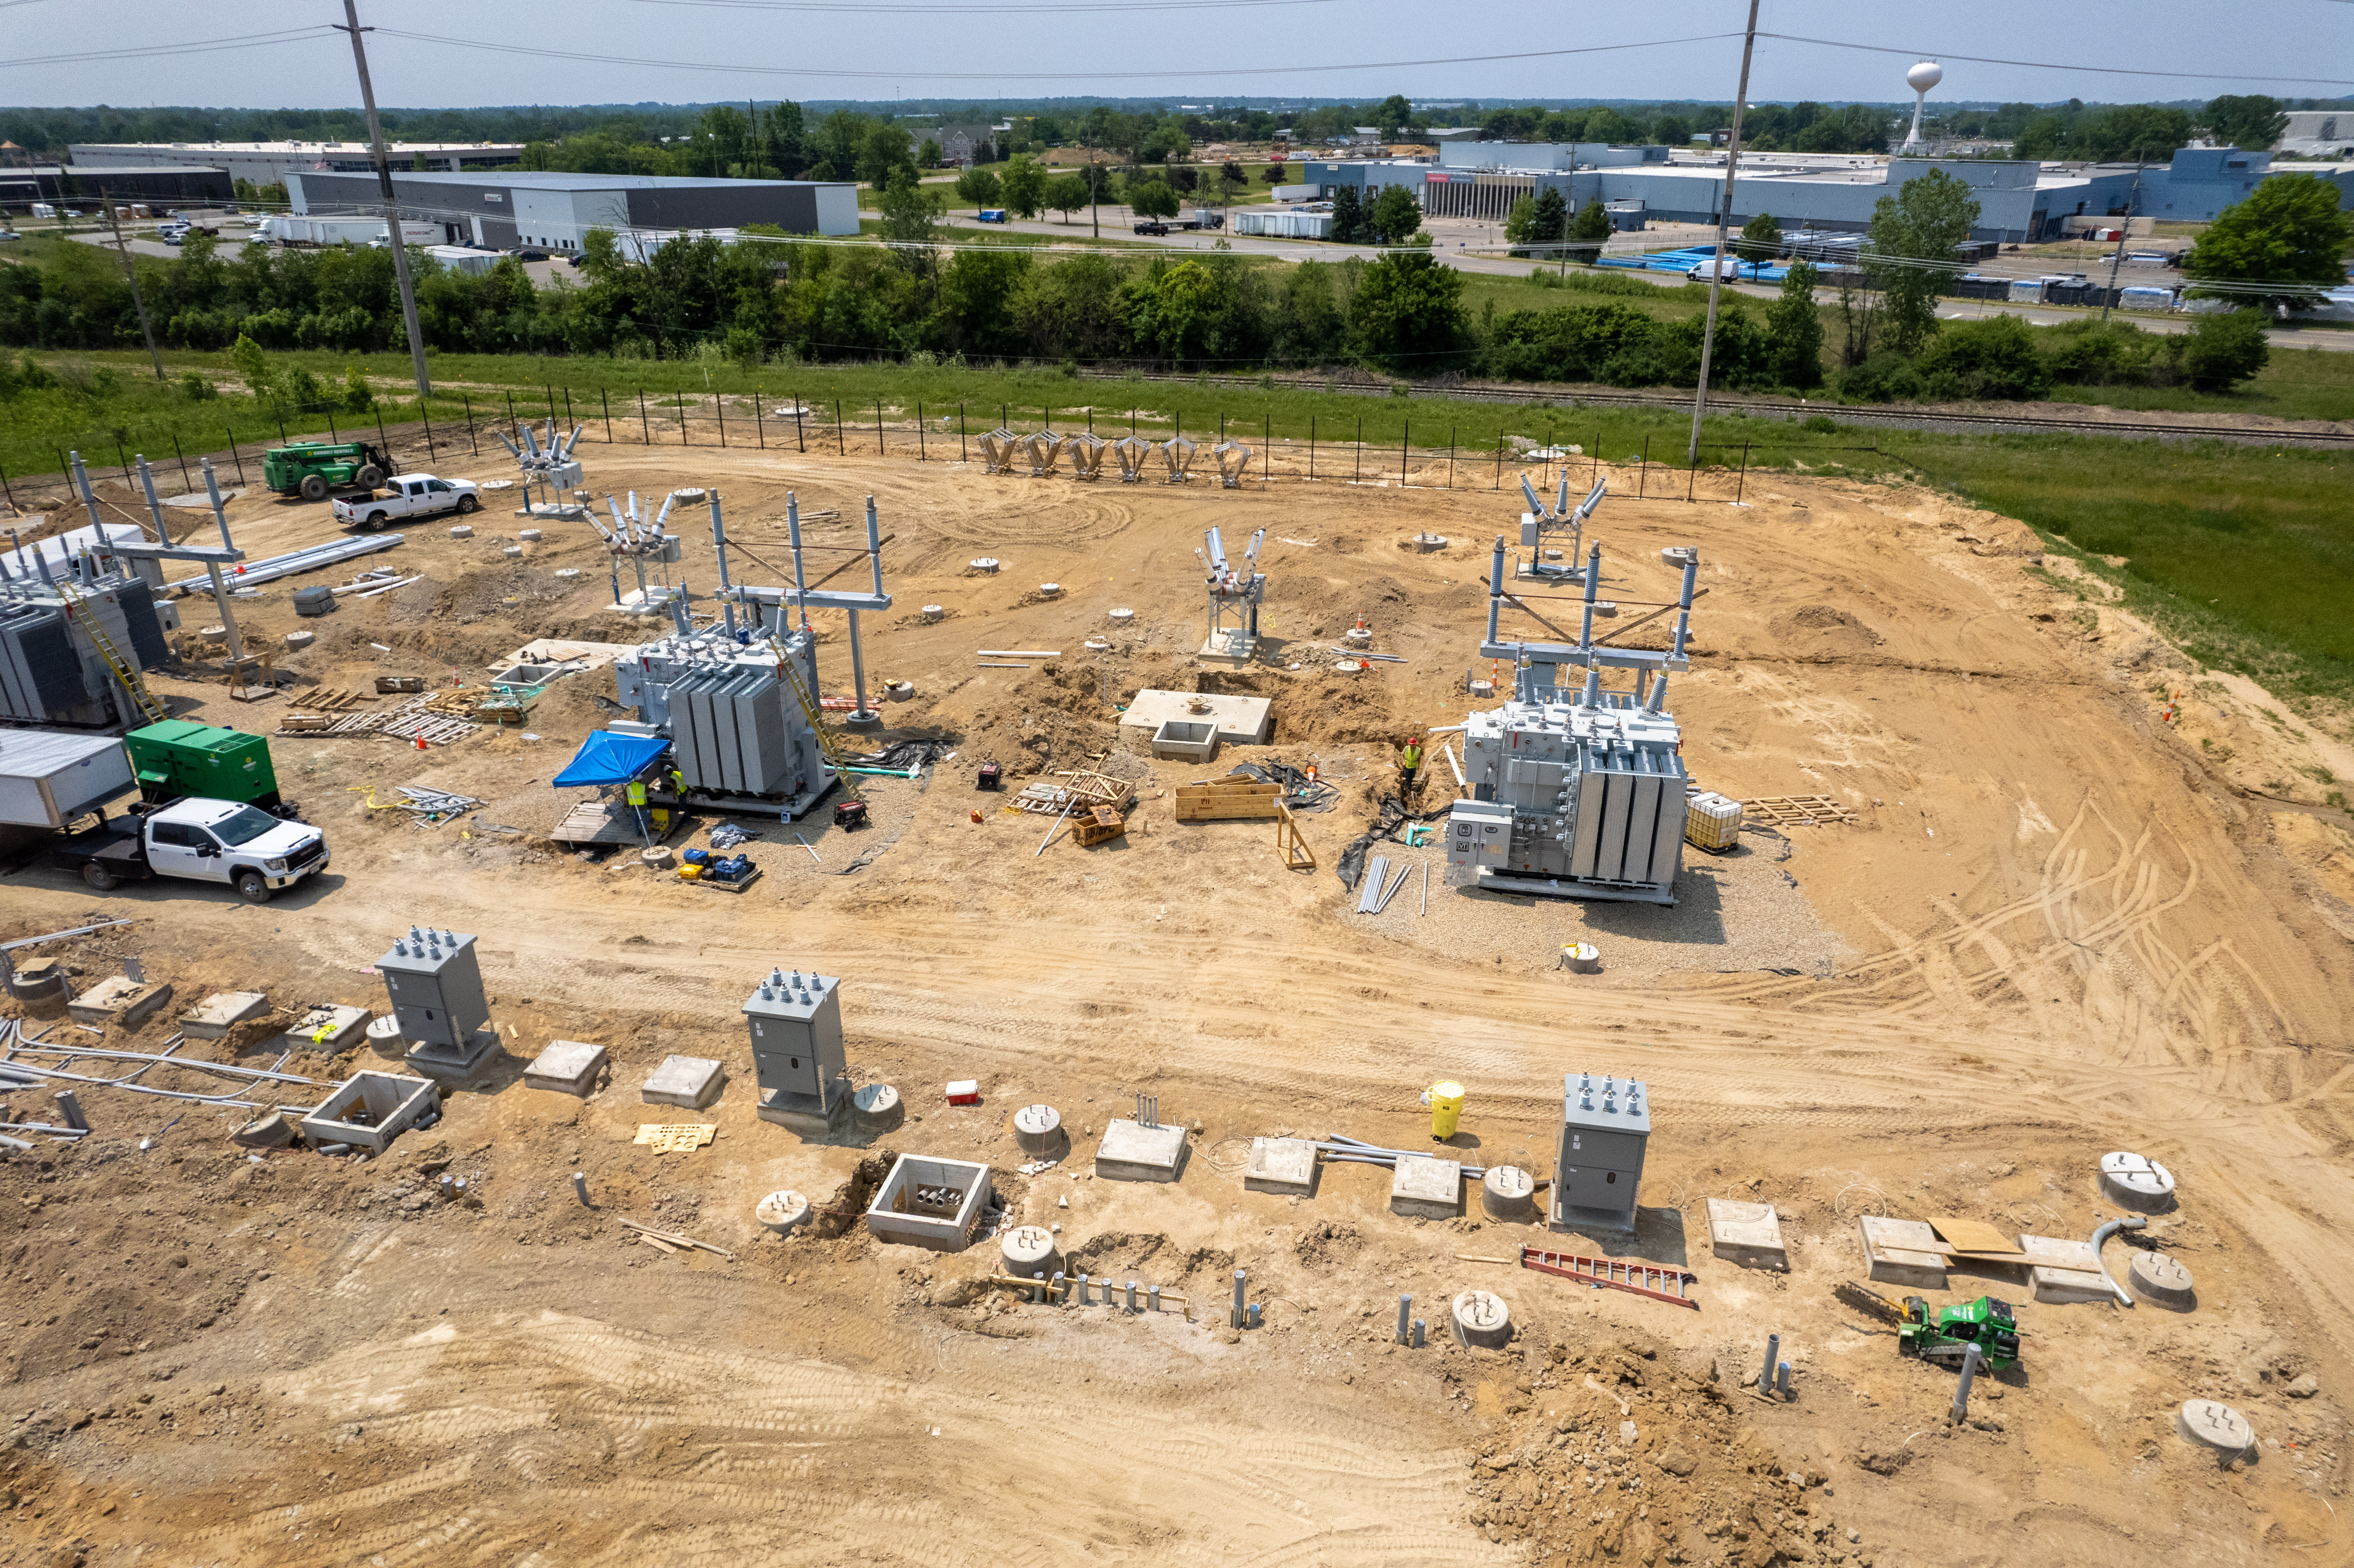 transformer being placed in position during construction of the East Point Substation